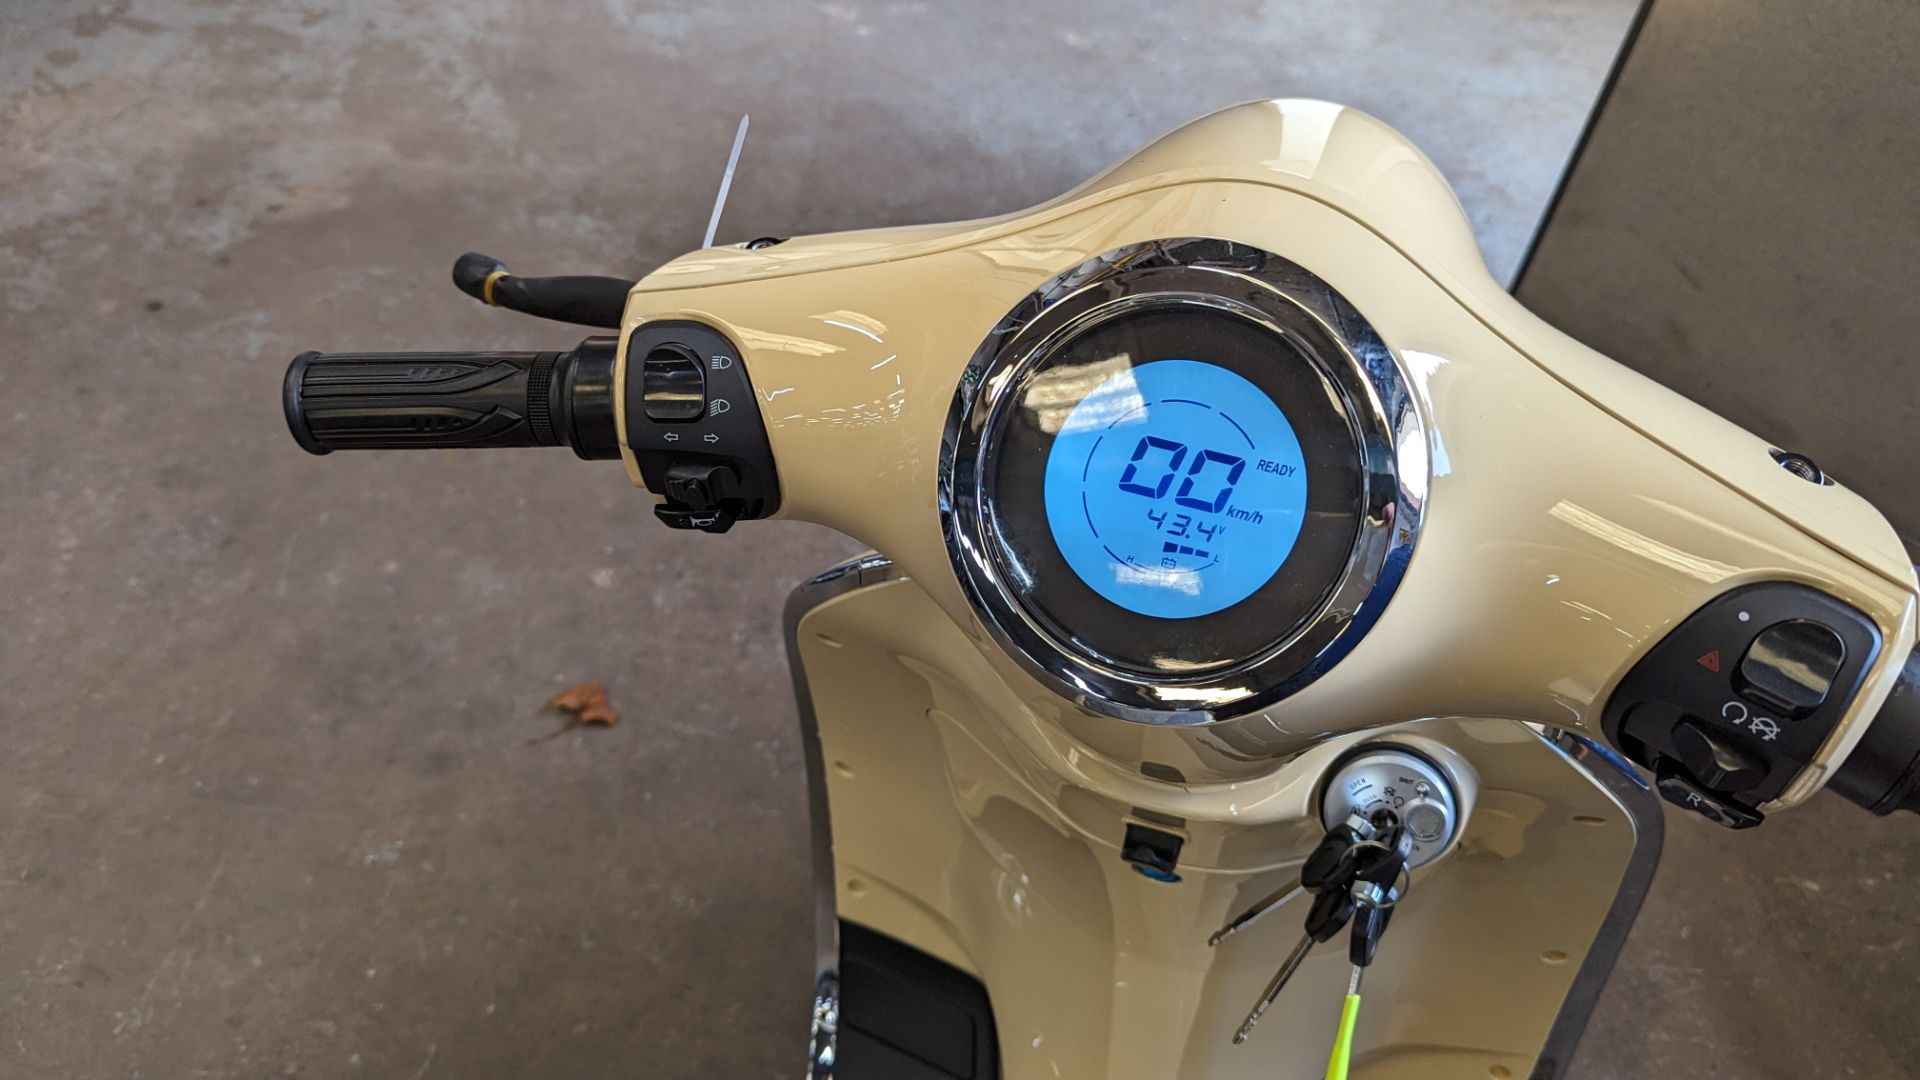 Model 30 Roma electric moped: 2000w brushless DC hub motor, CATL 48V 50Ah removable lithium battery - Image 11 of 22